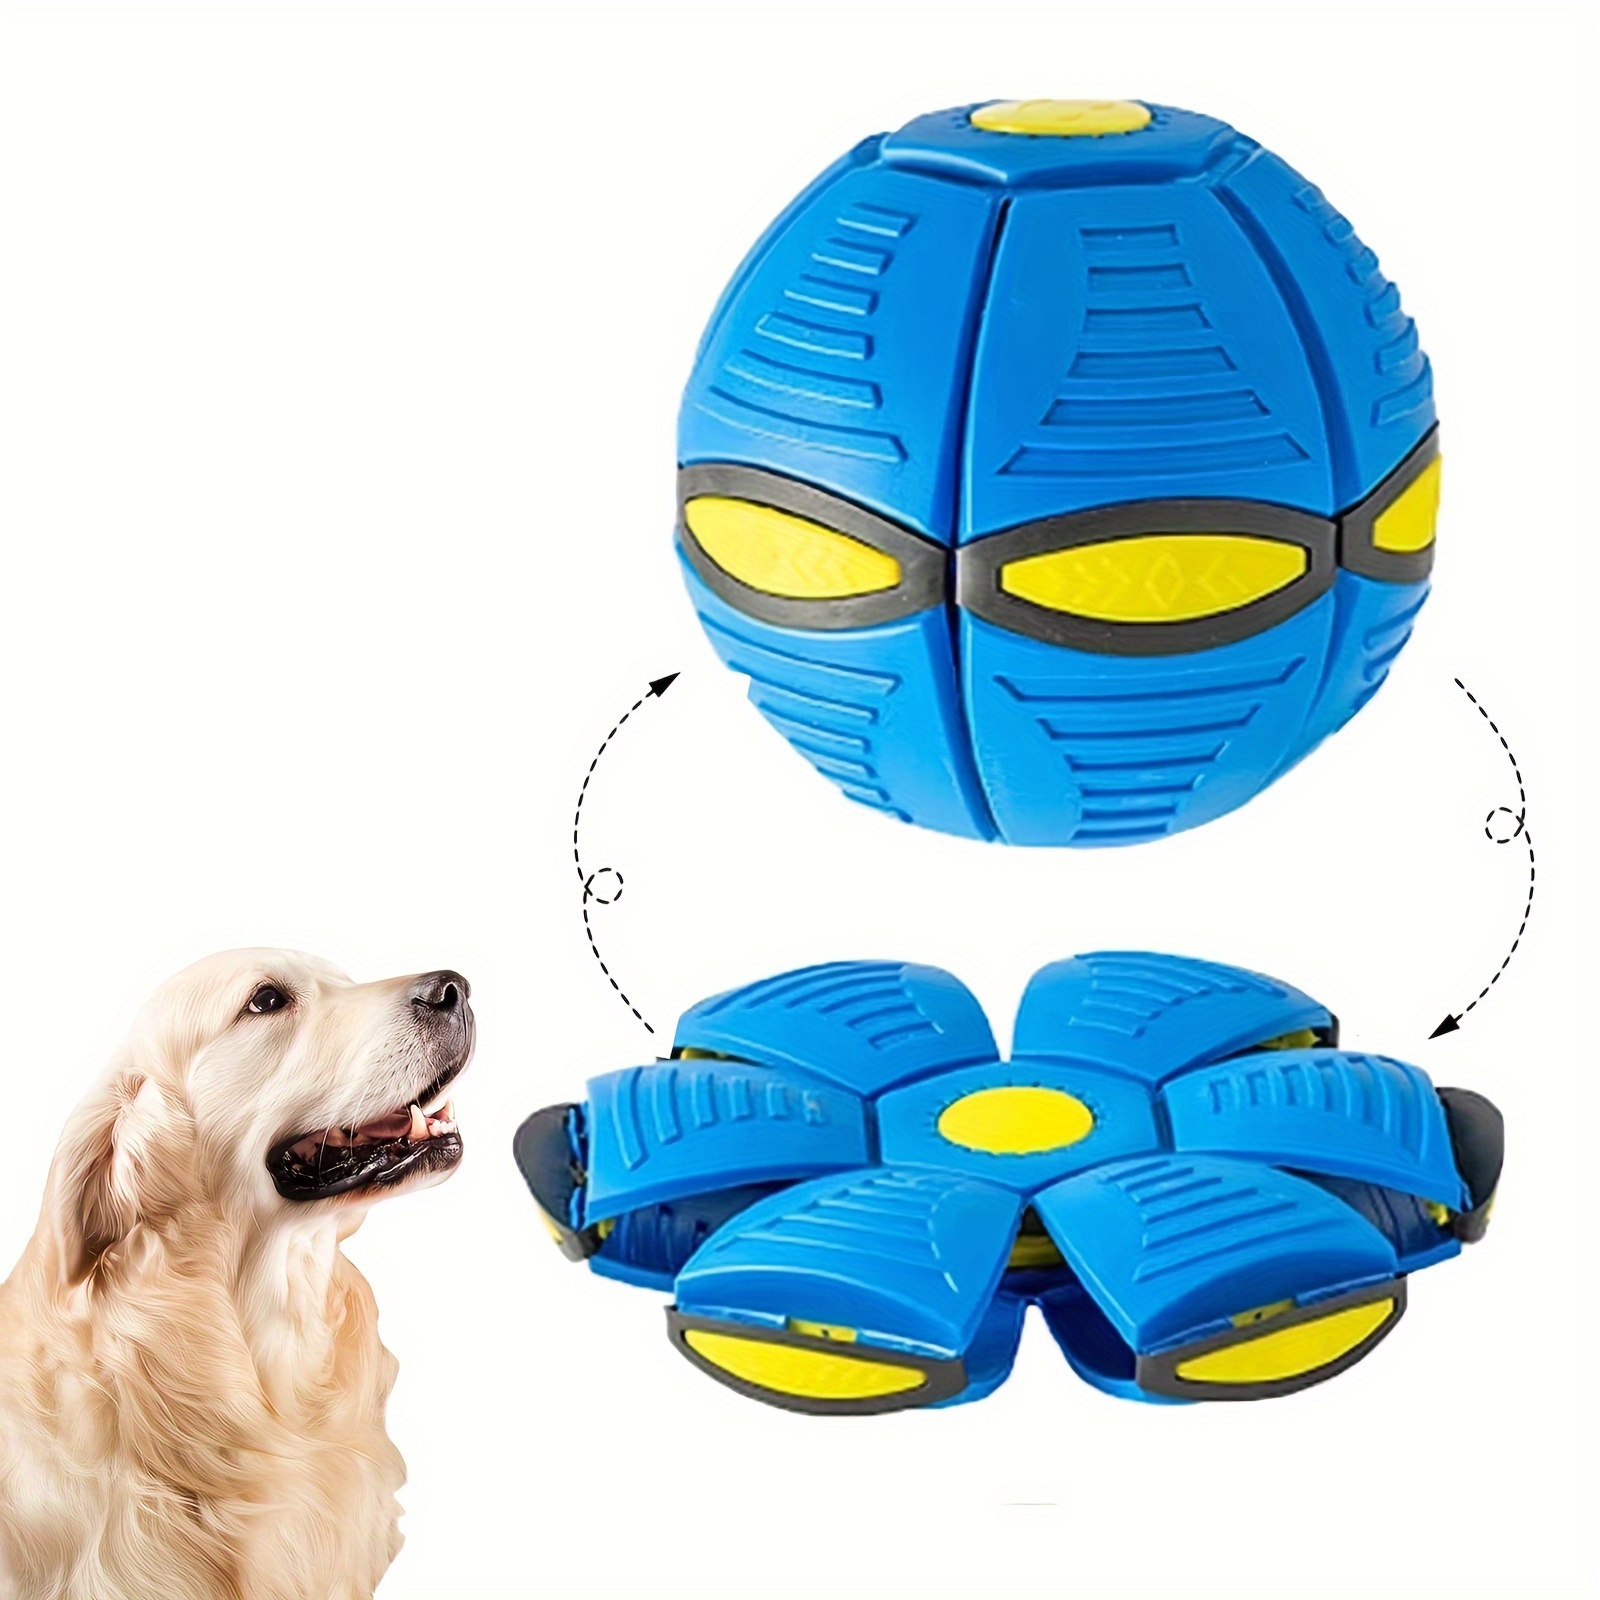 

Flying Saucer Bounce Ball, Pet Toy Flying Saucer Ball For Dogs, , Durable, Fun For Family Outdoor Activities And Exercise, Perfect Gift For Dogs